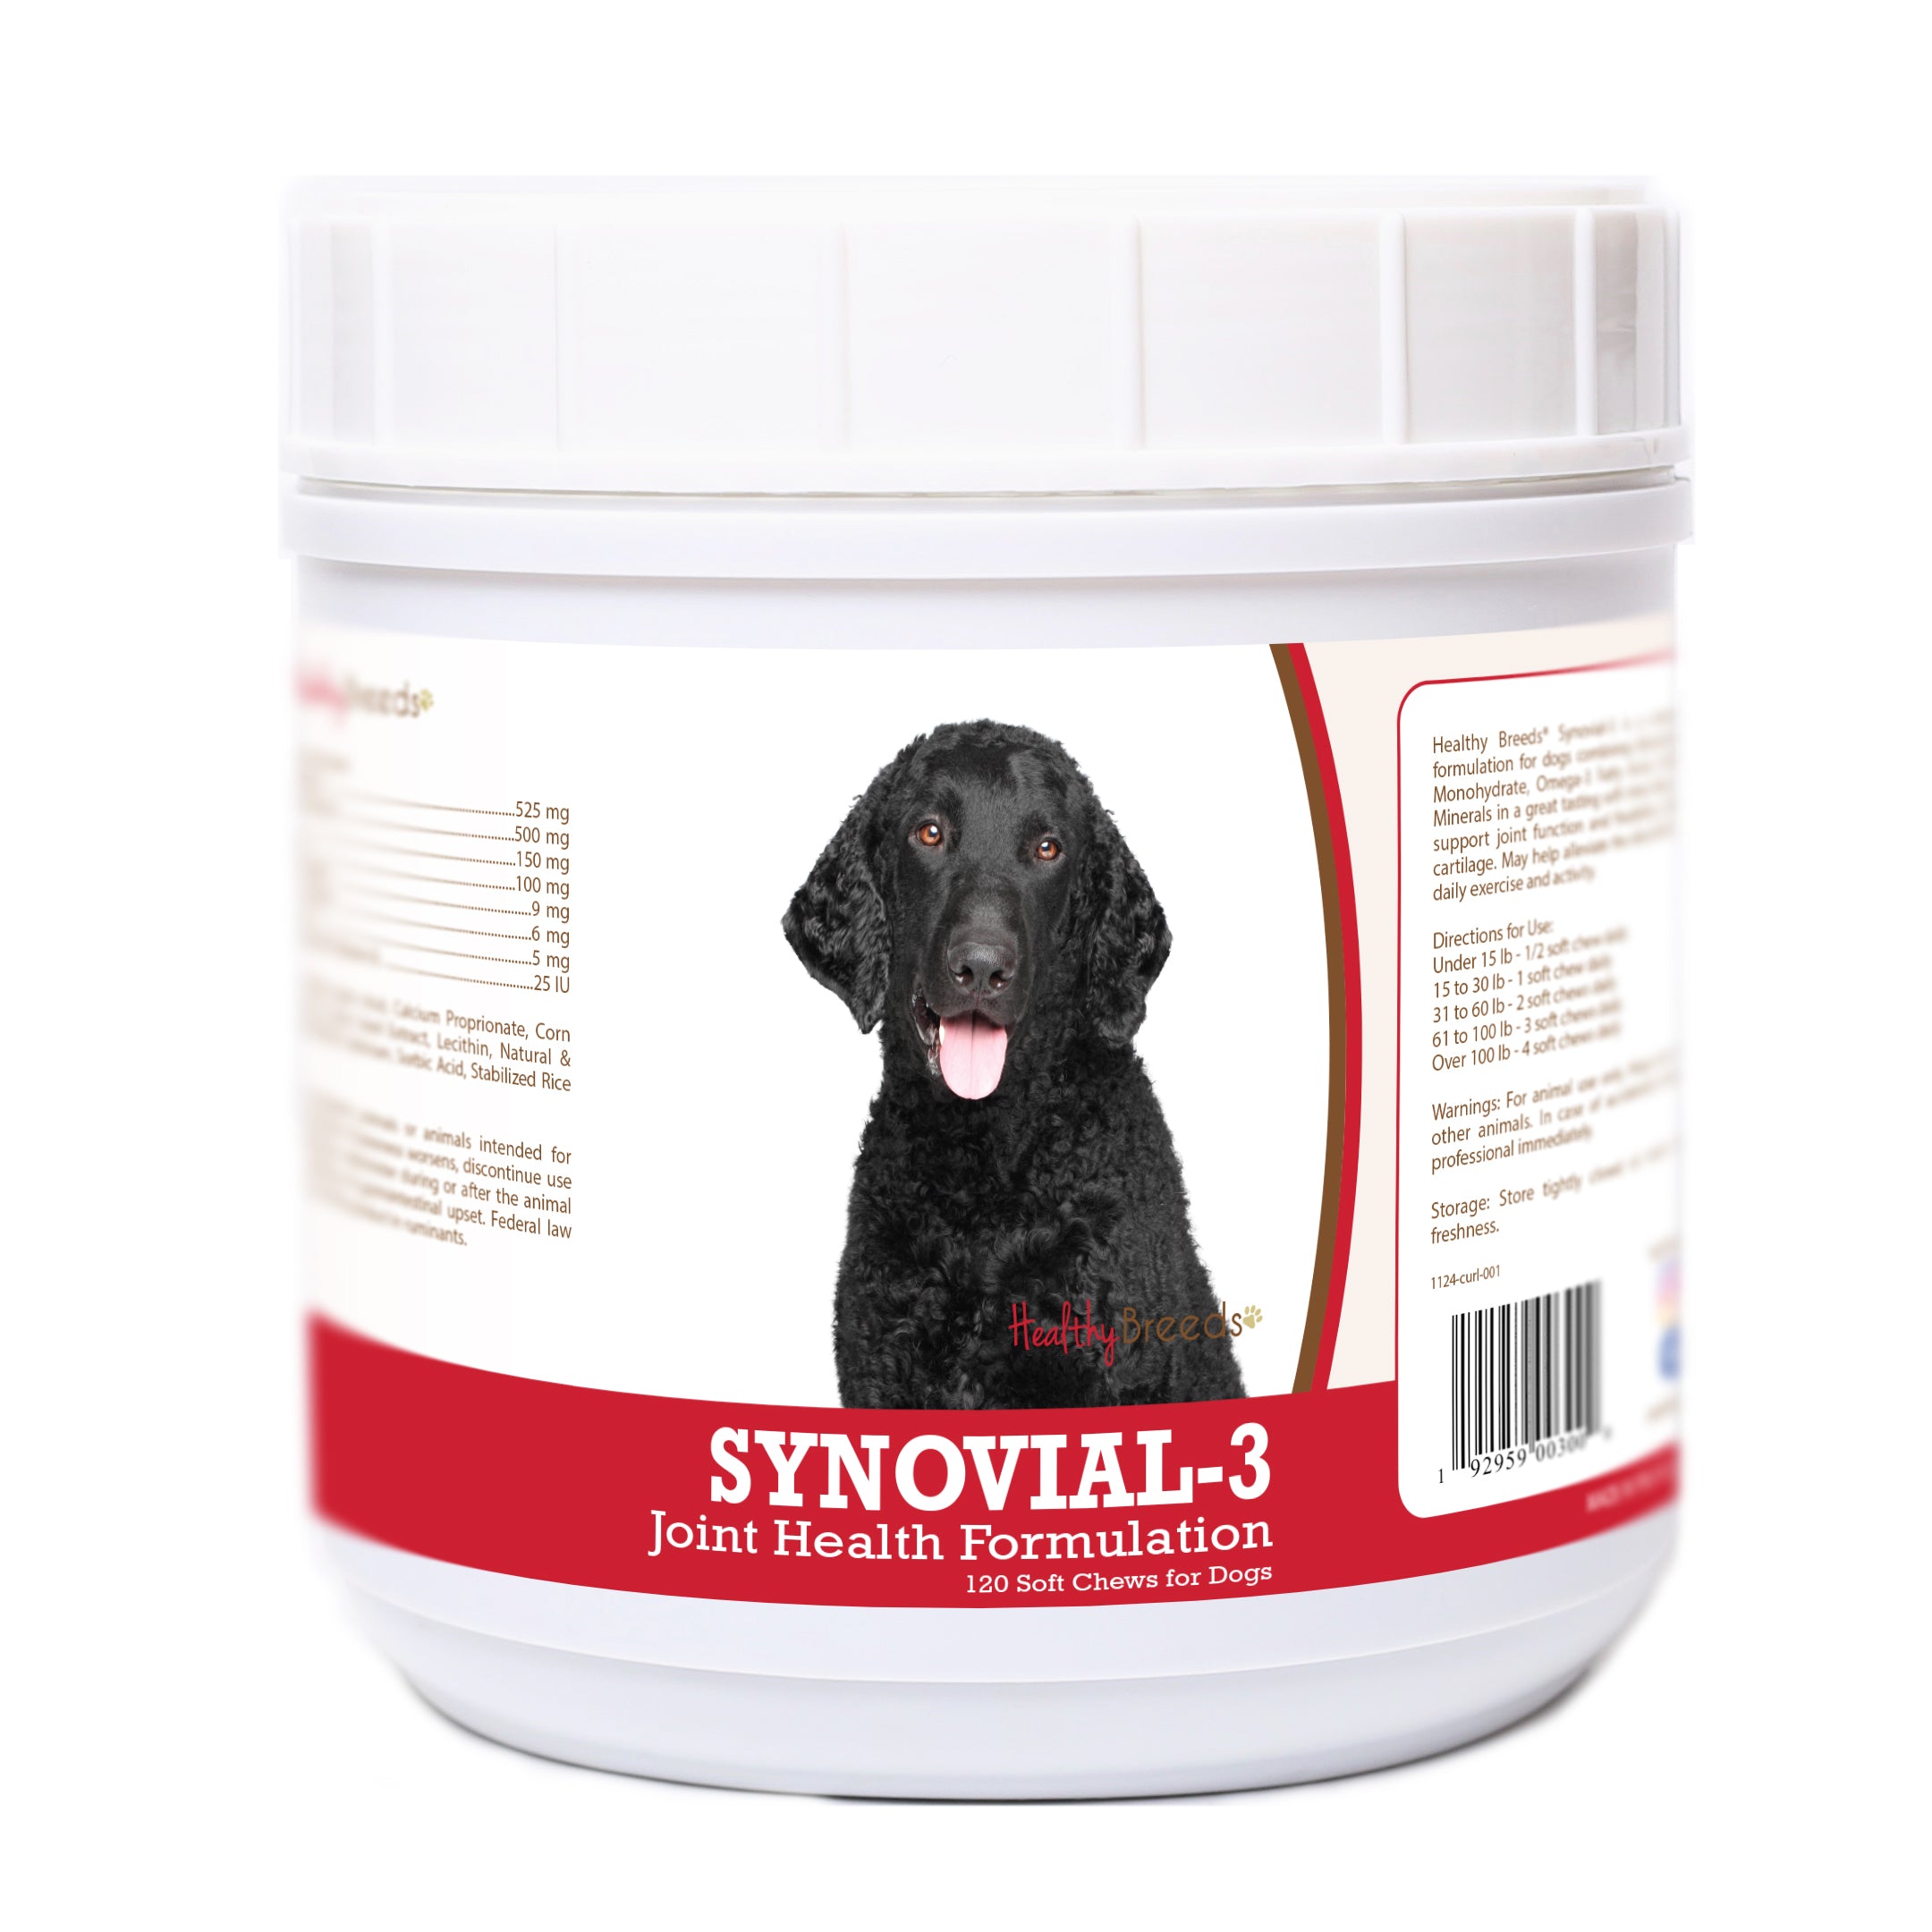 Curly-Coated Retriever Synovial-3 Joint Health Formulation Soft Chews 120 Count